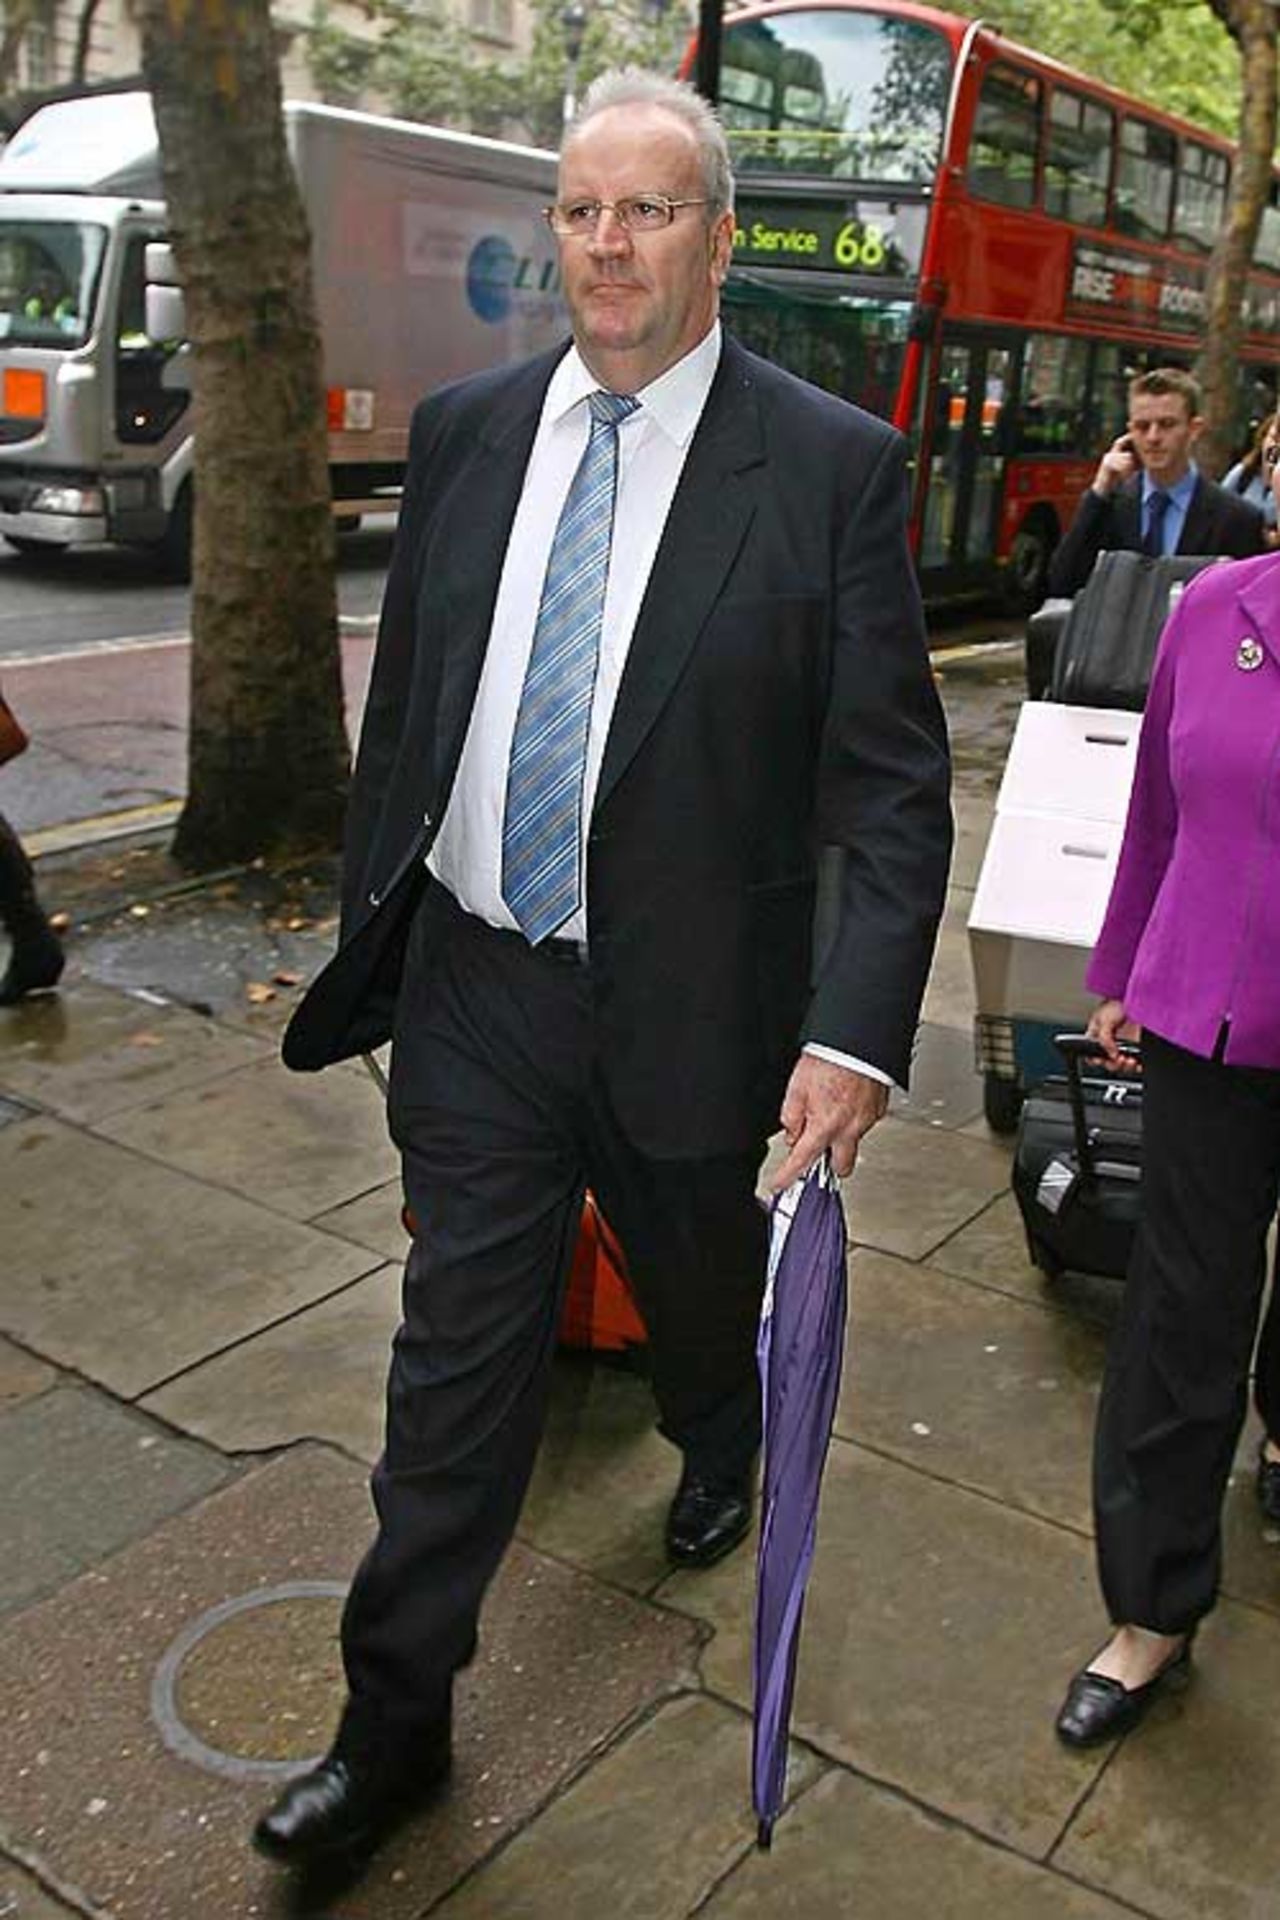 Darrell Hair walks to the High Court in London ahead of his employment tribunal, October 1, 2007